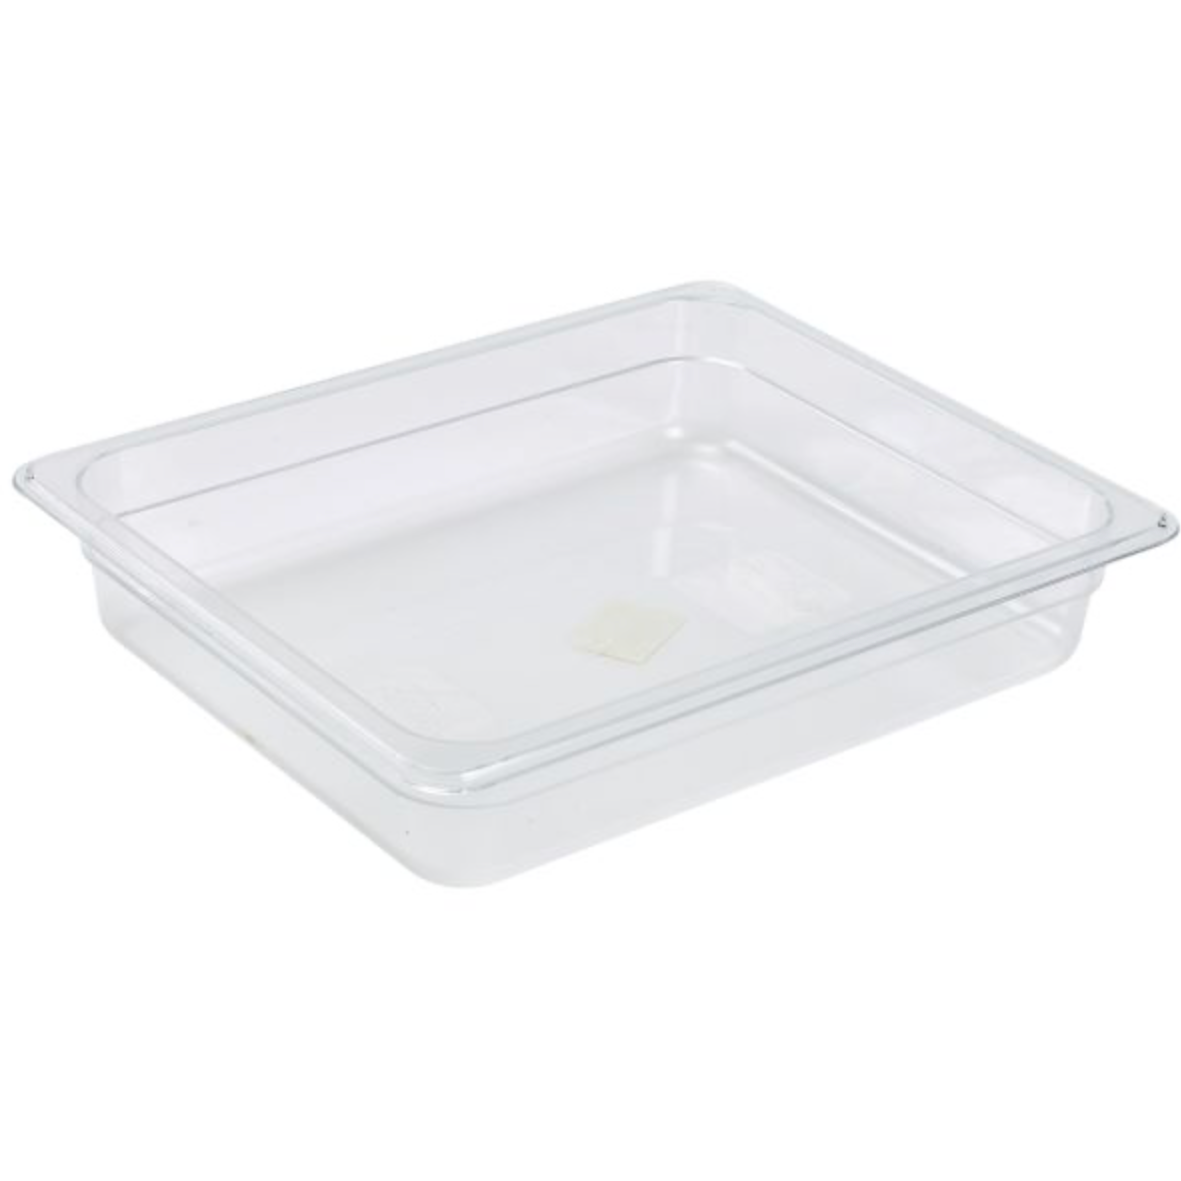 GenWare 1/2 -Polycarbonate GN Pan 65mm Clear